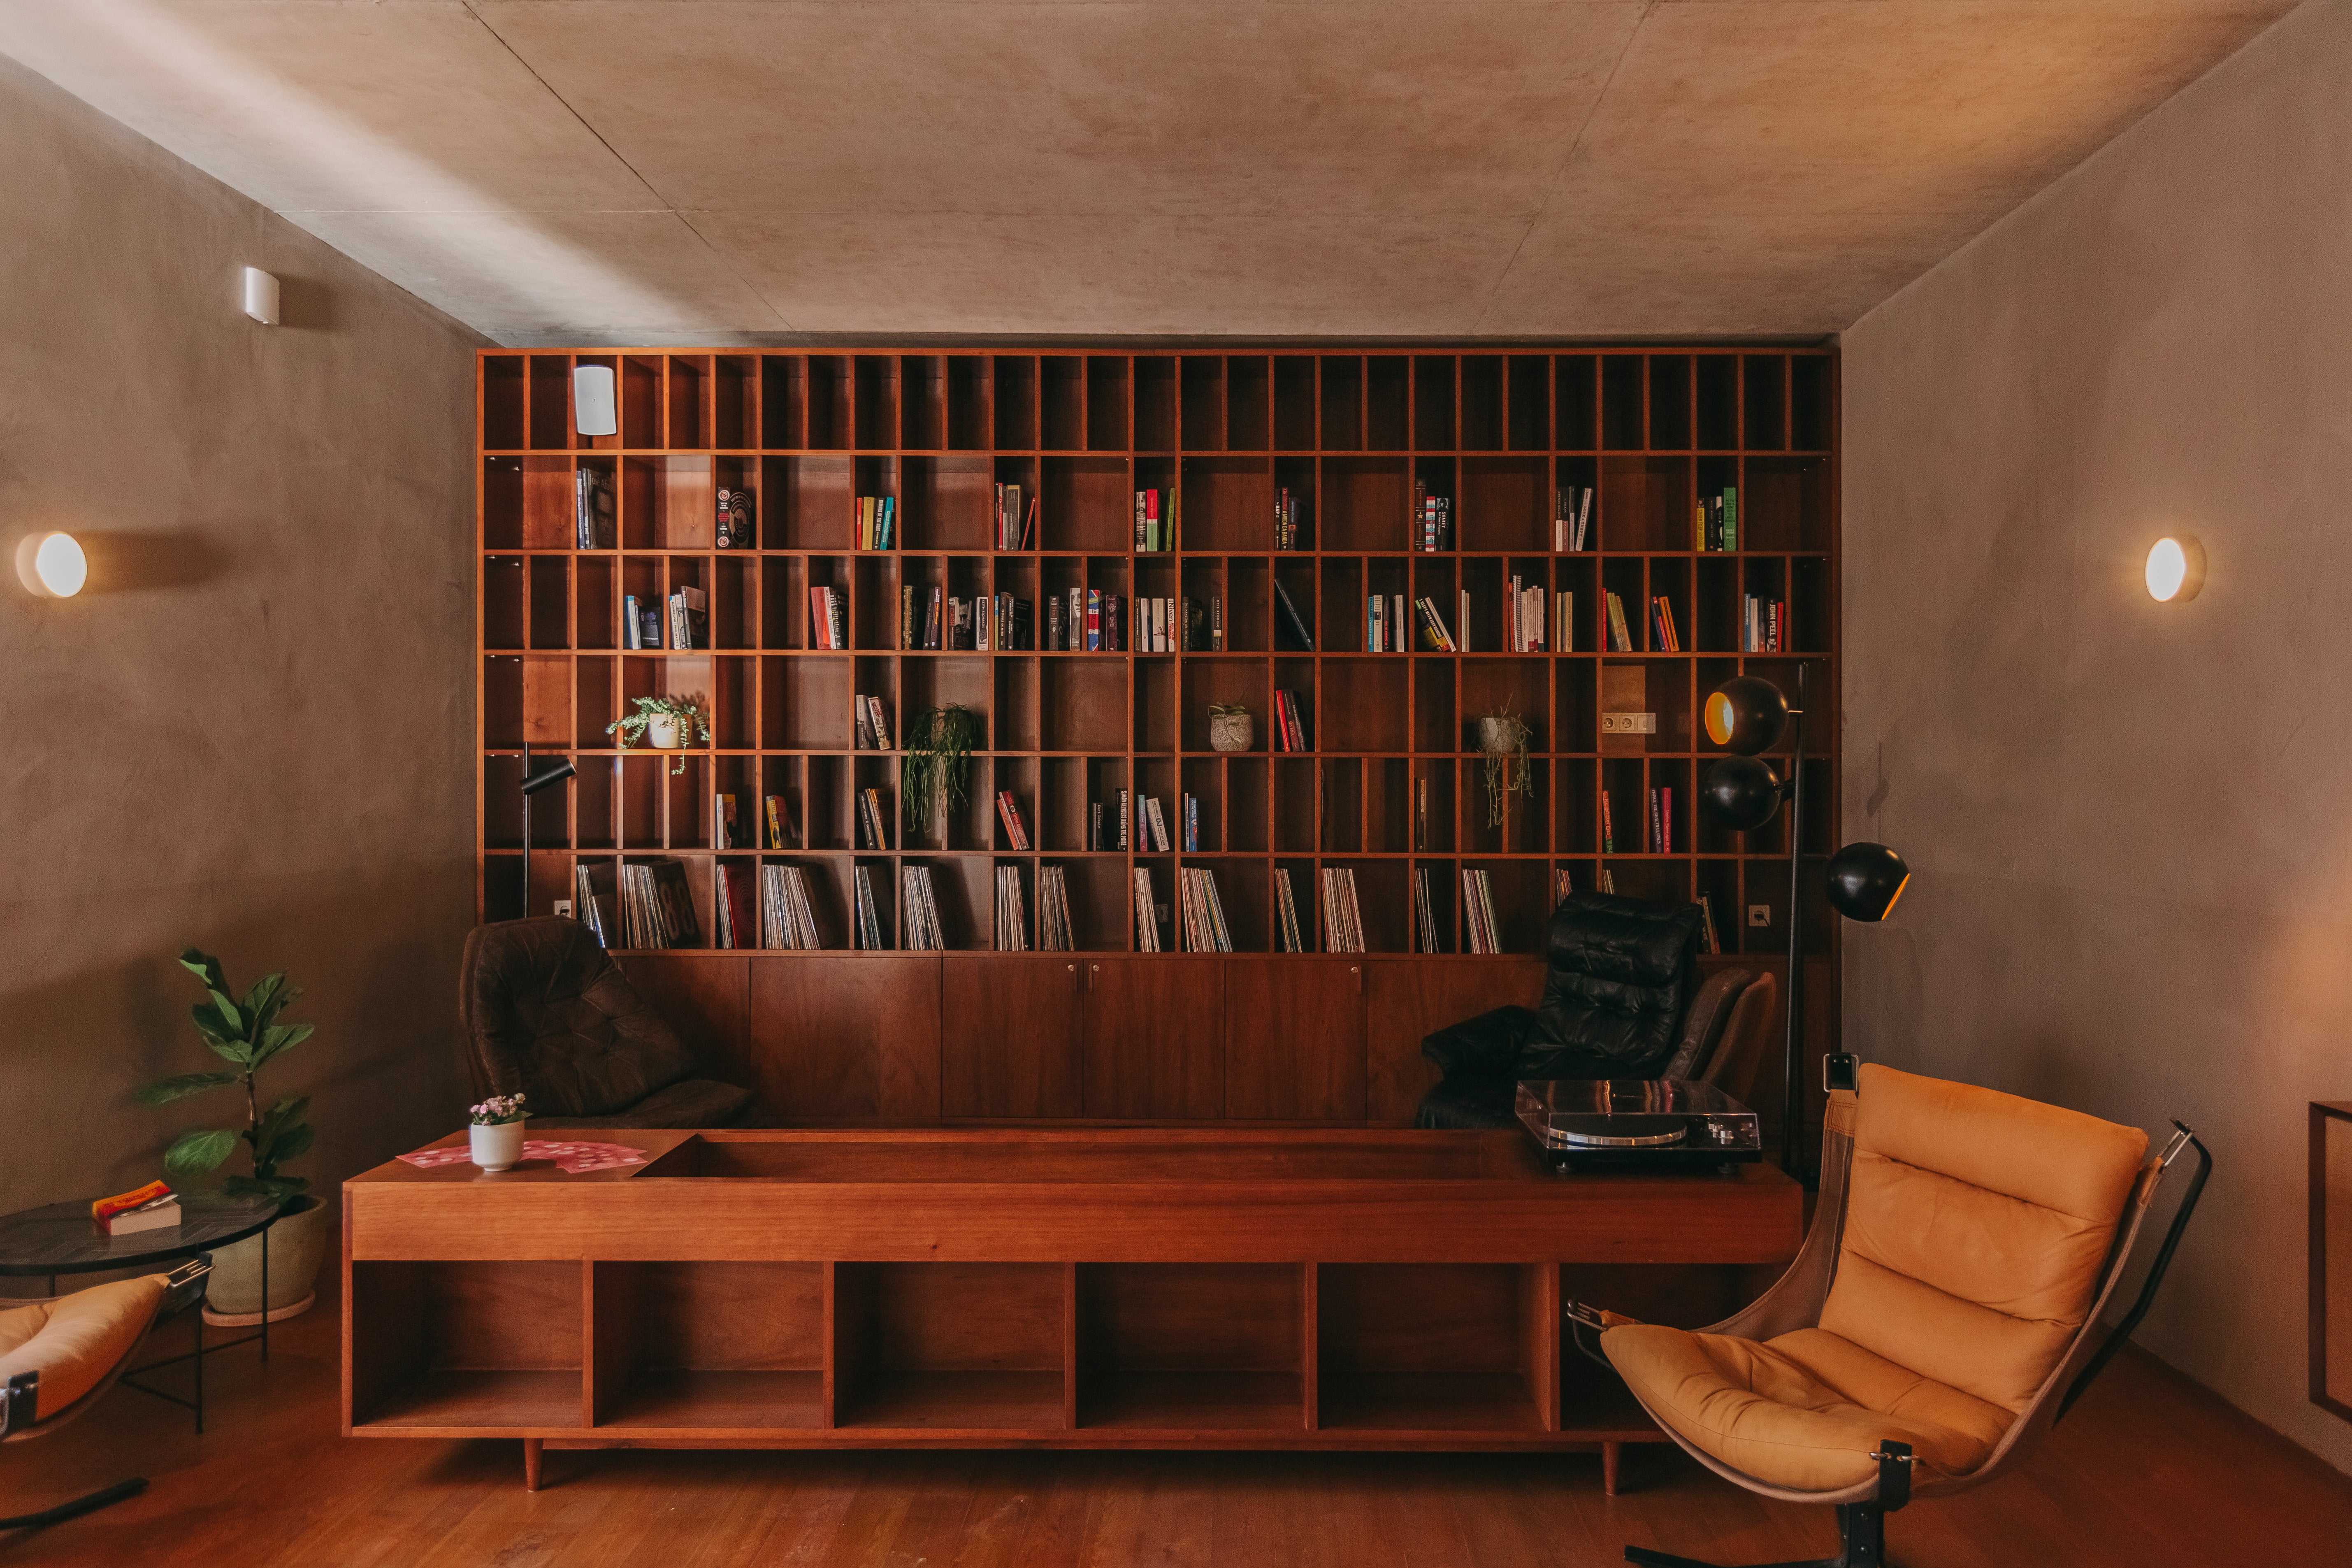 Guests can peruse and listen to vinyl in the hotel’s record library